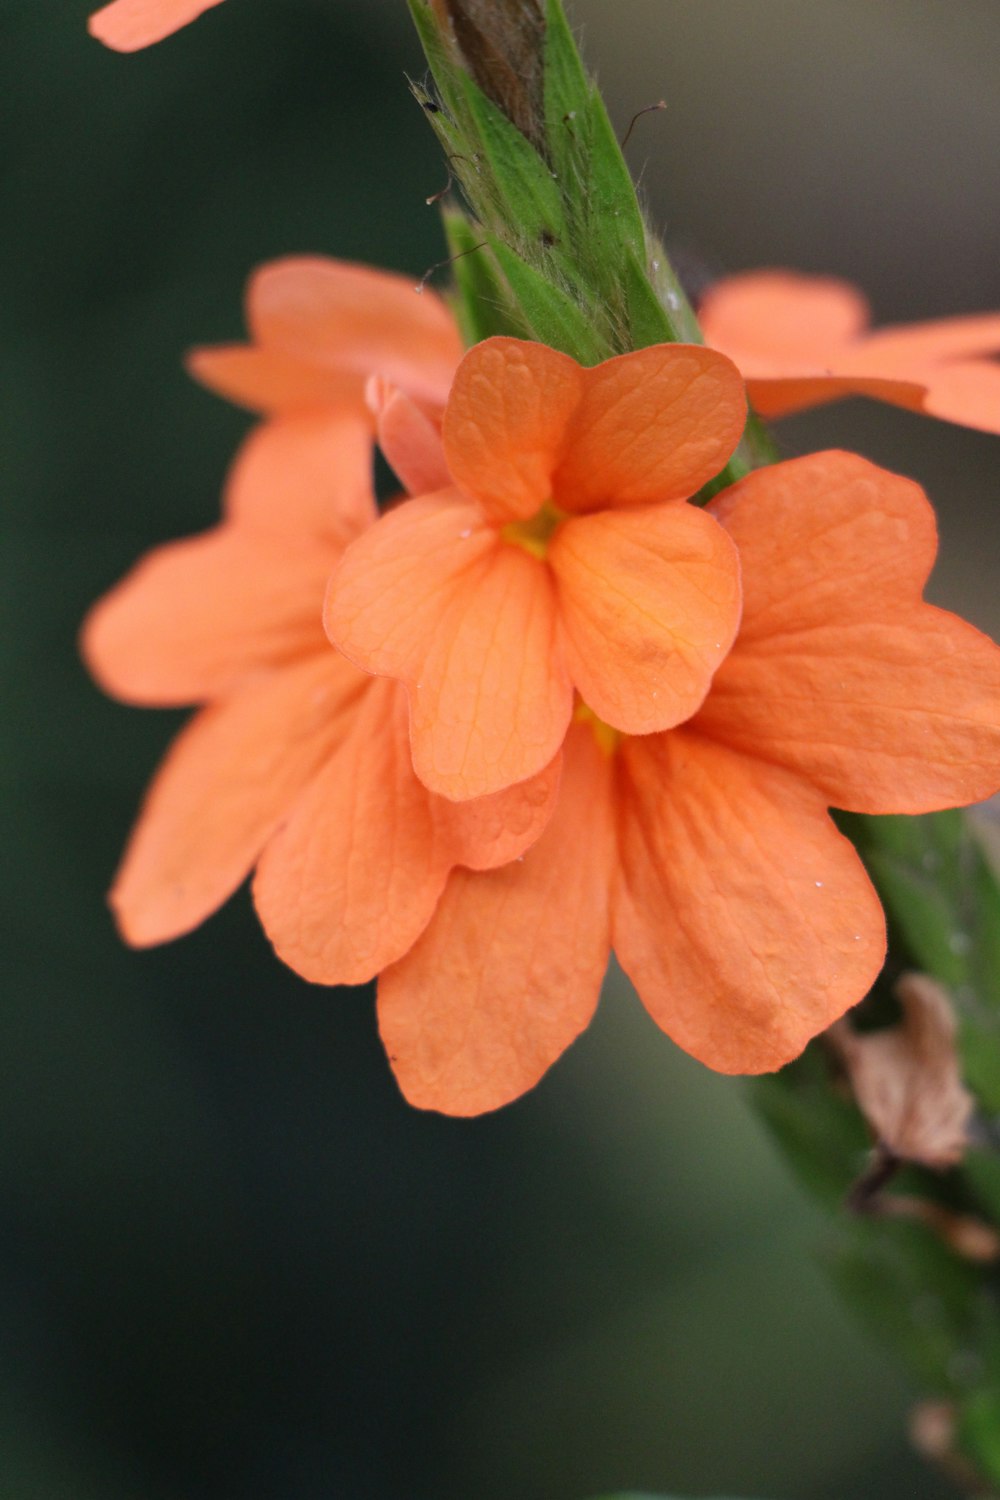 a close up of an orange flower on a plant